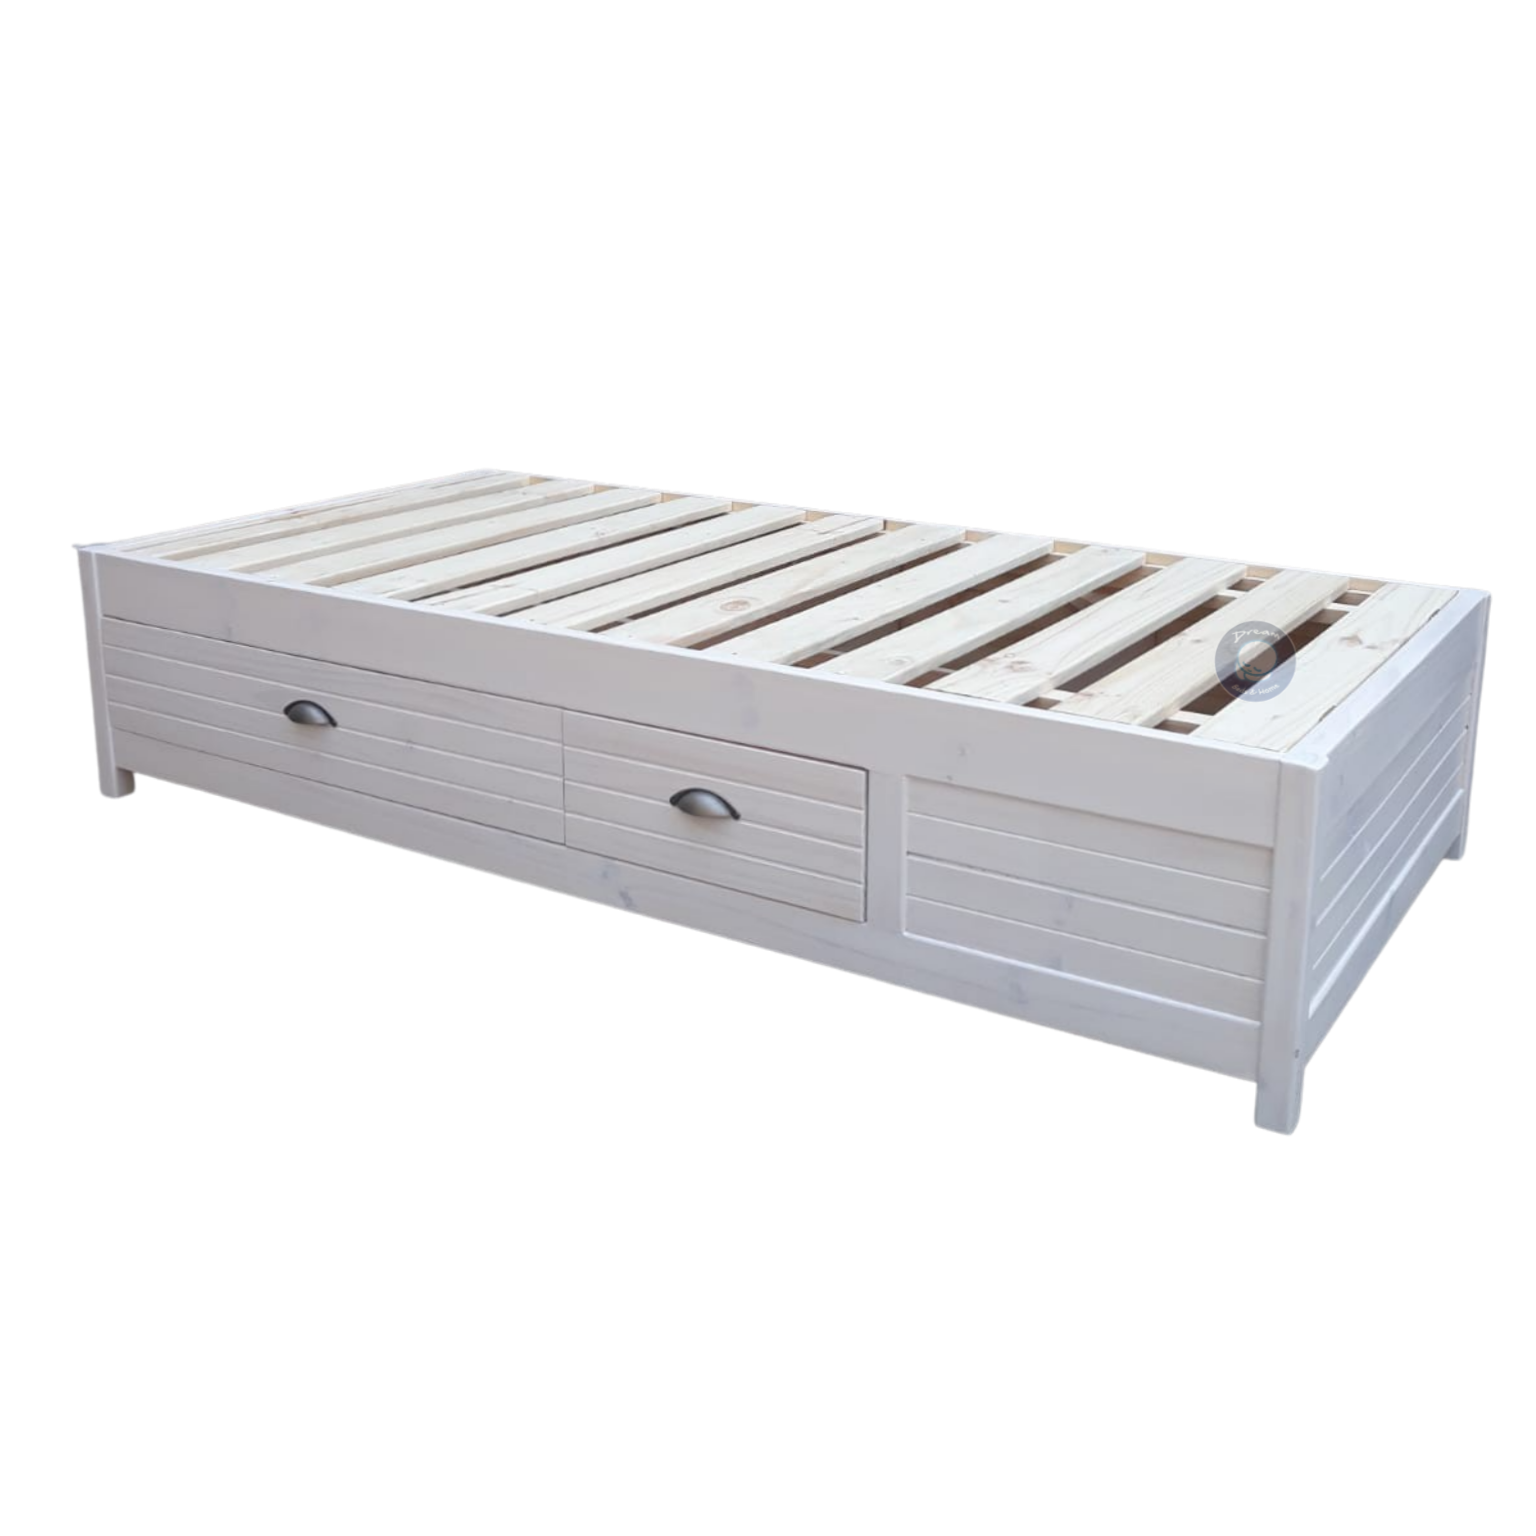 Single Storage Bed Base With 2 Drawers, King Single Bed Frame With Drawers Underneath